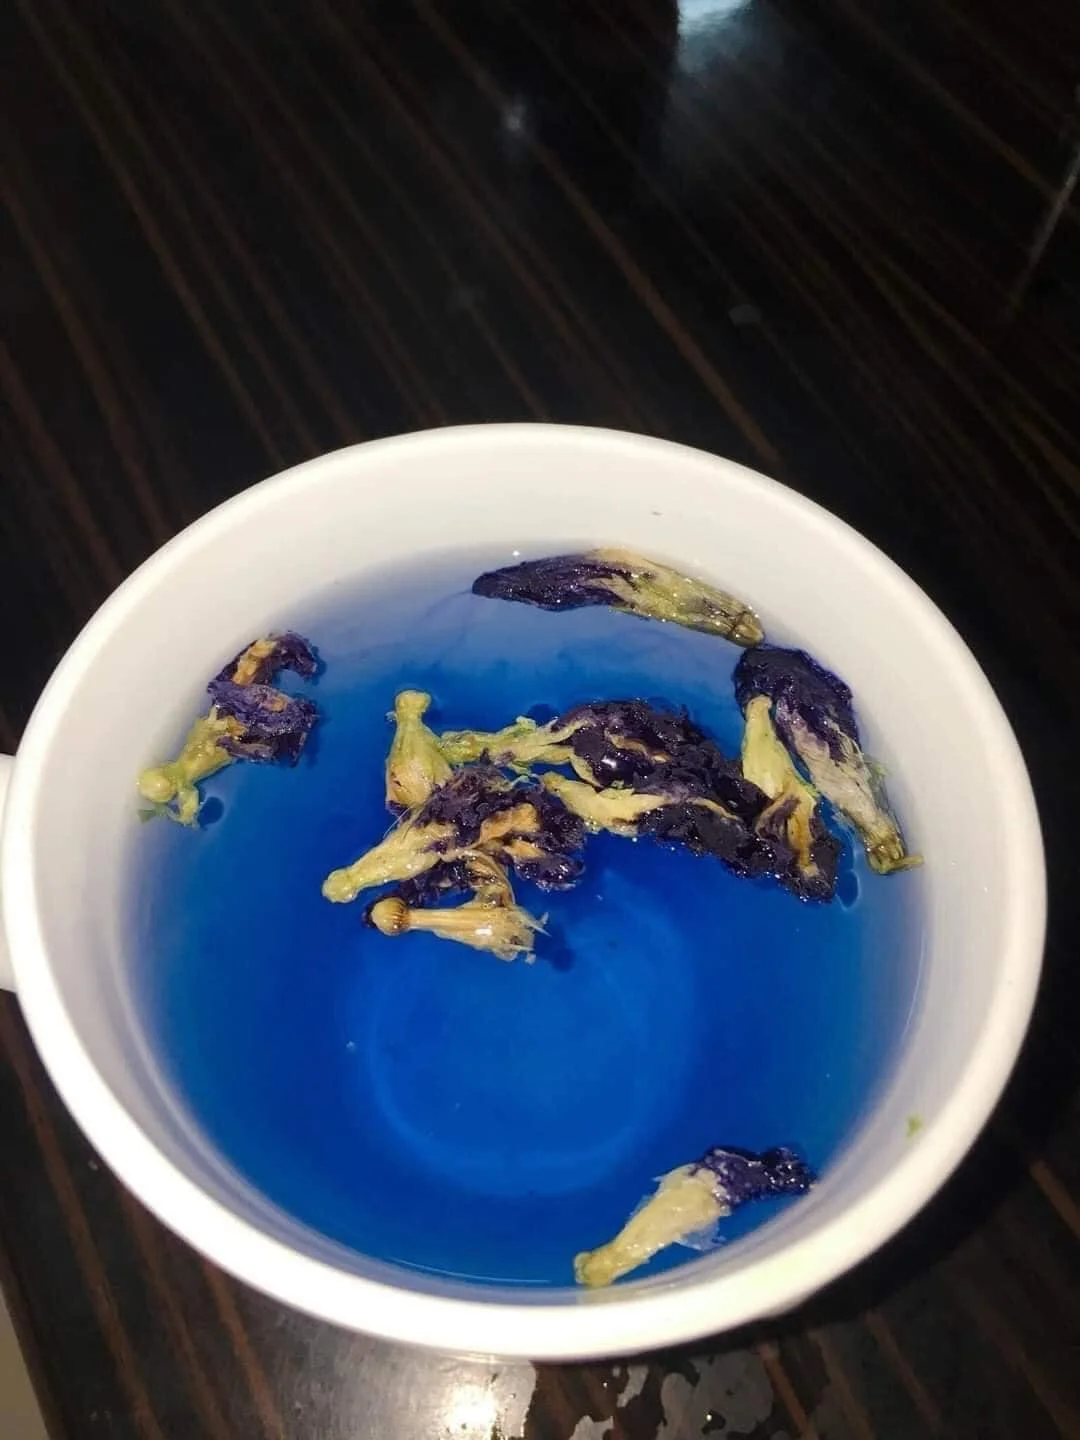 
Blue Butterfly Pea Flower Powder For 100% Natural Food Coloring Butterfly bean flower Food Dyeing Blue Matcha 0084 947 900 124 